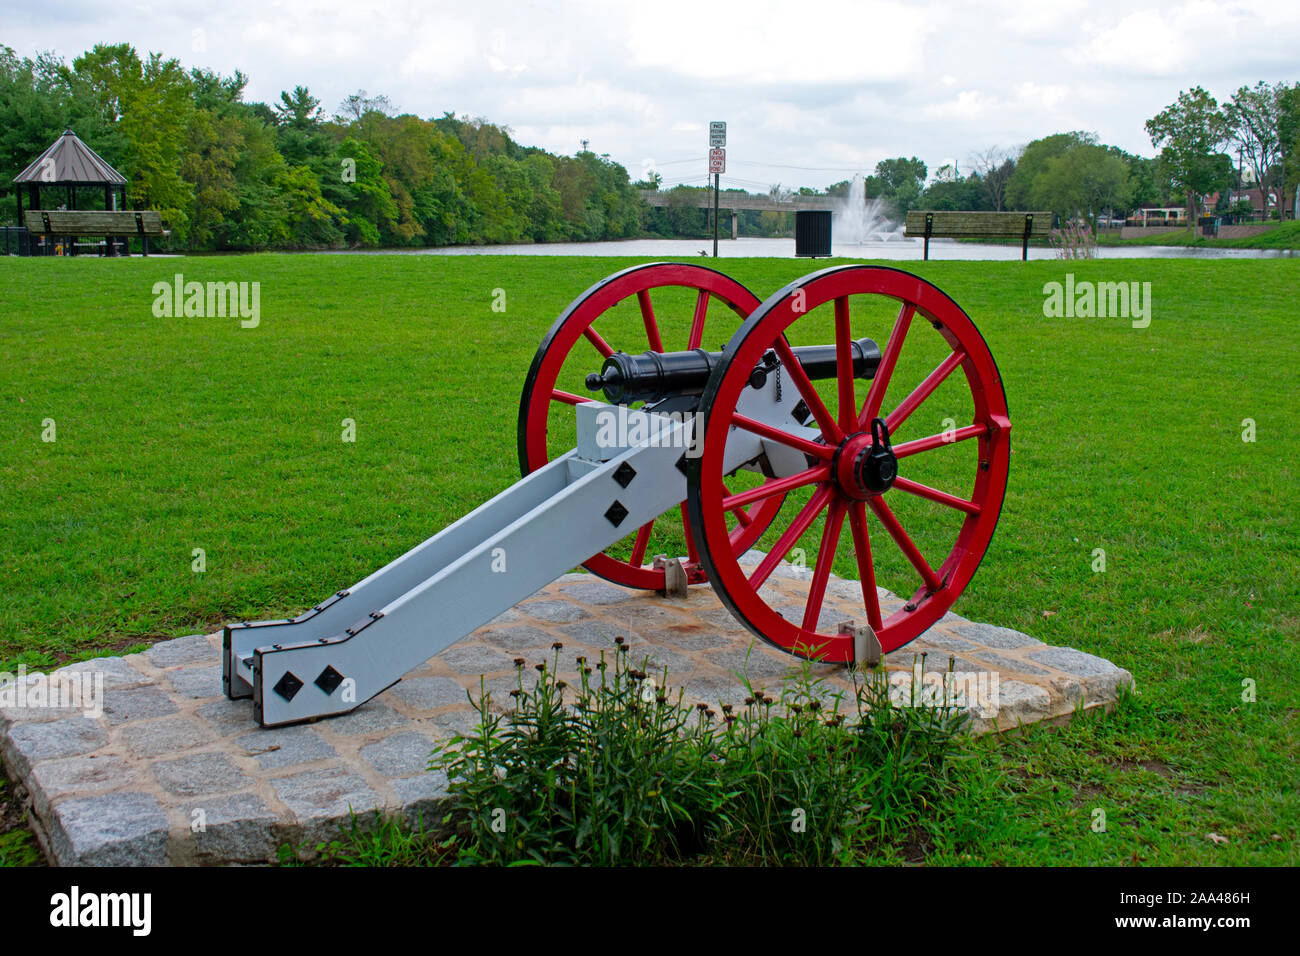 American Revolutionary War cannon with red wheels and a black barrel on display in front of a water fountain at Columbus Park, Piscataway, New Jersey, Stock Photo